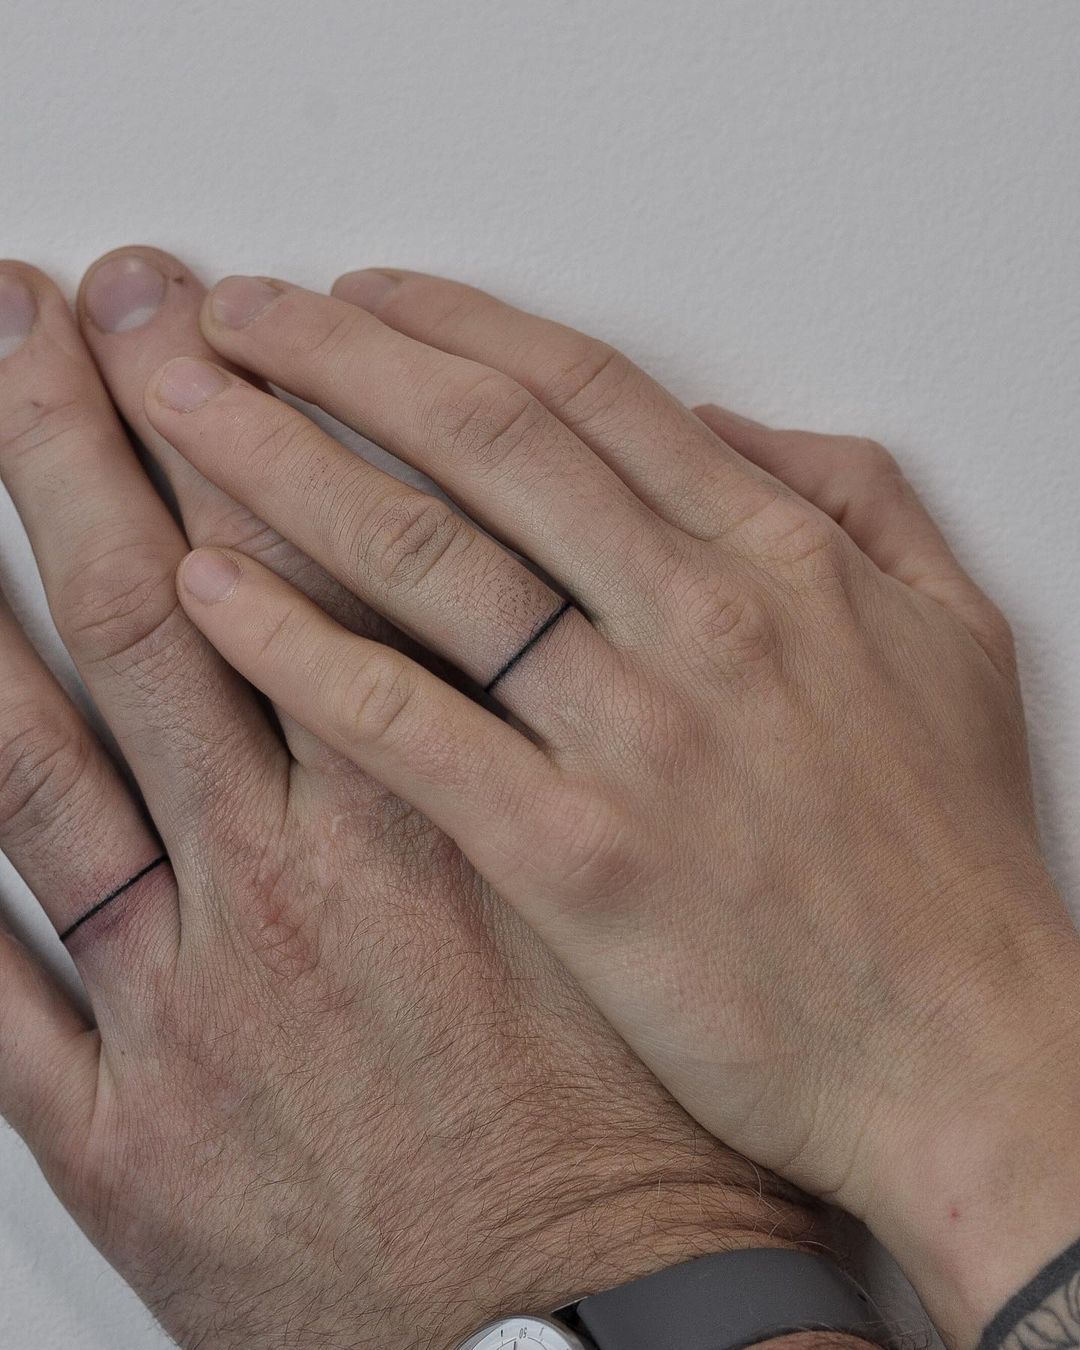 Matching Ring Tattoos on Ring Fingers